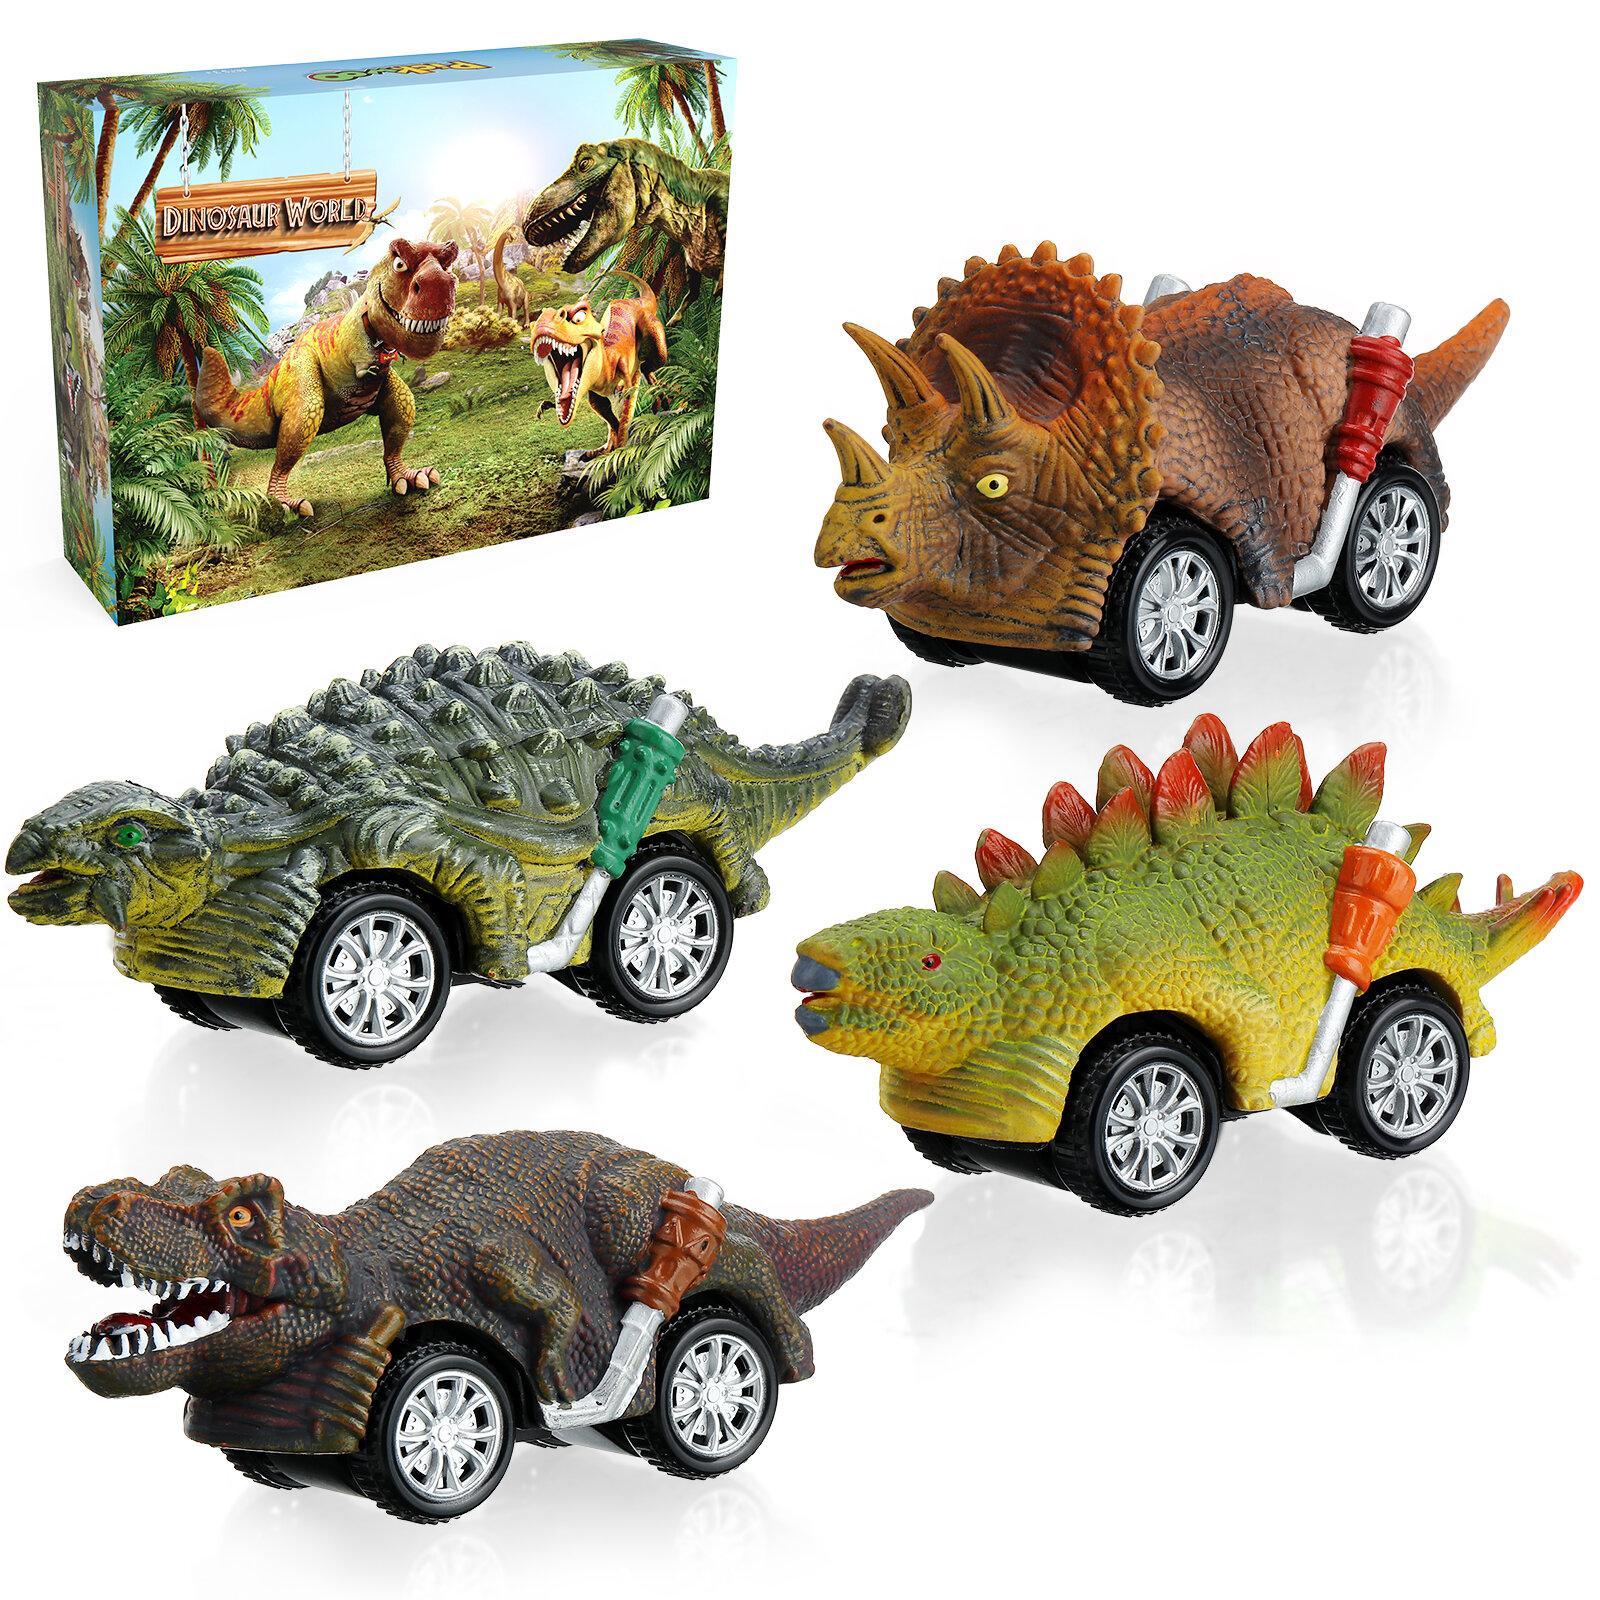 Pickwoo Dinosaur Toys Cars Inertia Vehicles Toddlers Kids Dinosaur Party Games with T-Rex Dino Toys Playset Birthday Gif